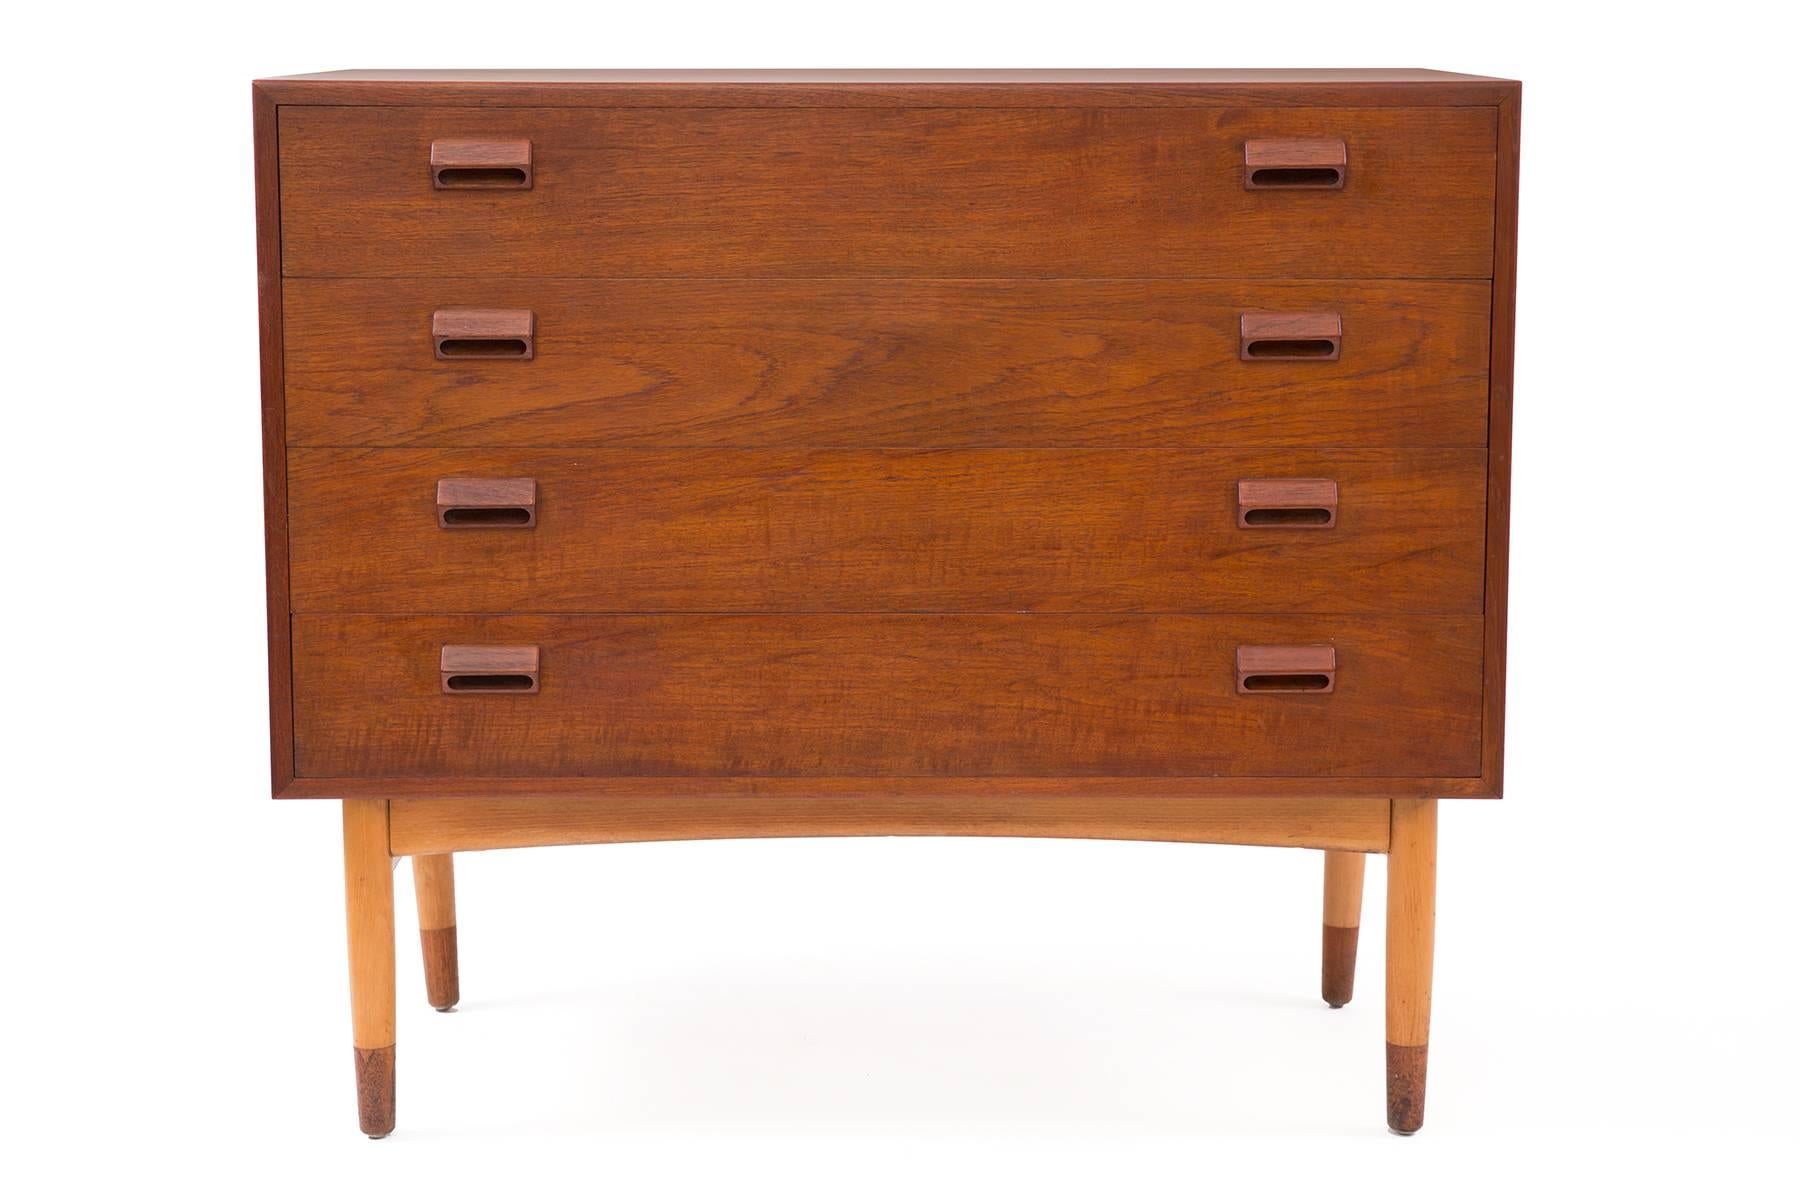 Pair of Borge Mogensen teak and beech chests, circa late 1950s. These all original examples each have four drawers with inset teak handles, solid teak and beech legs and beautifully grained teak cases. Price listed is for the pair of chests.
  